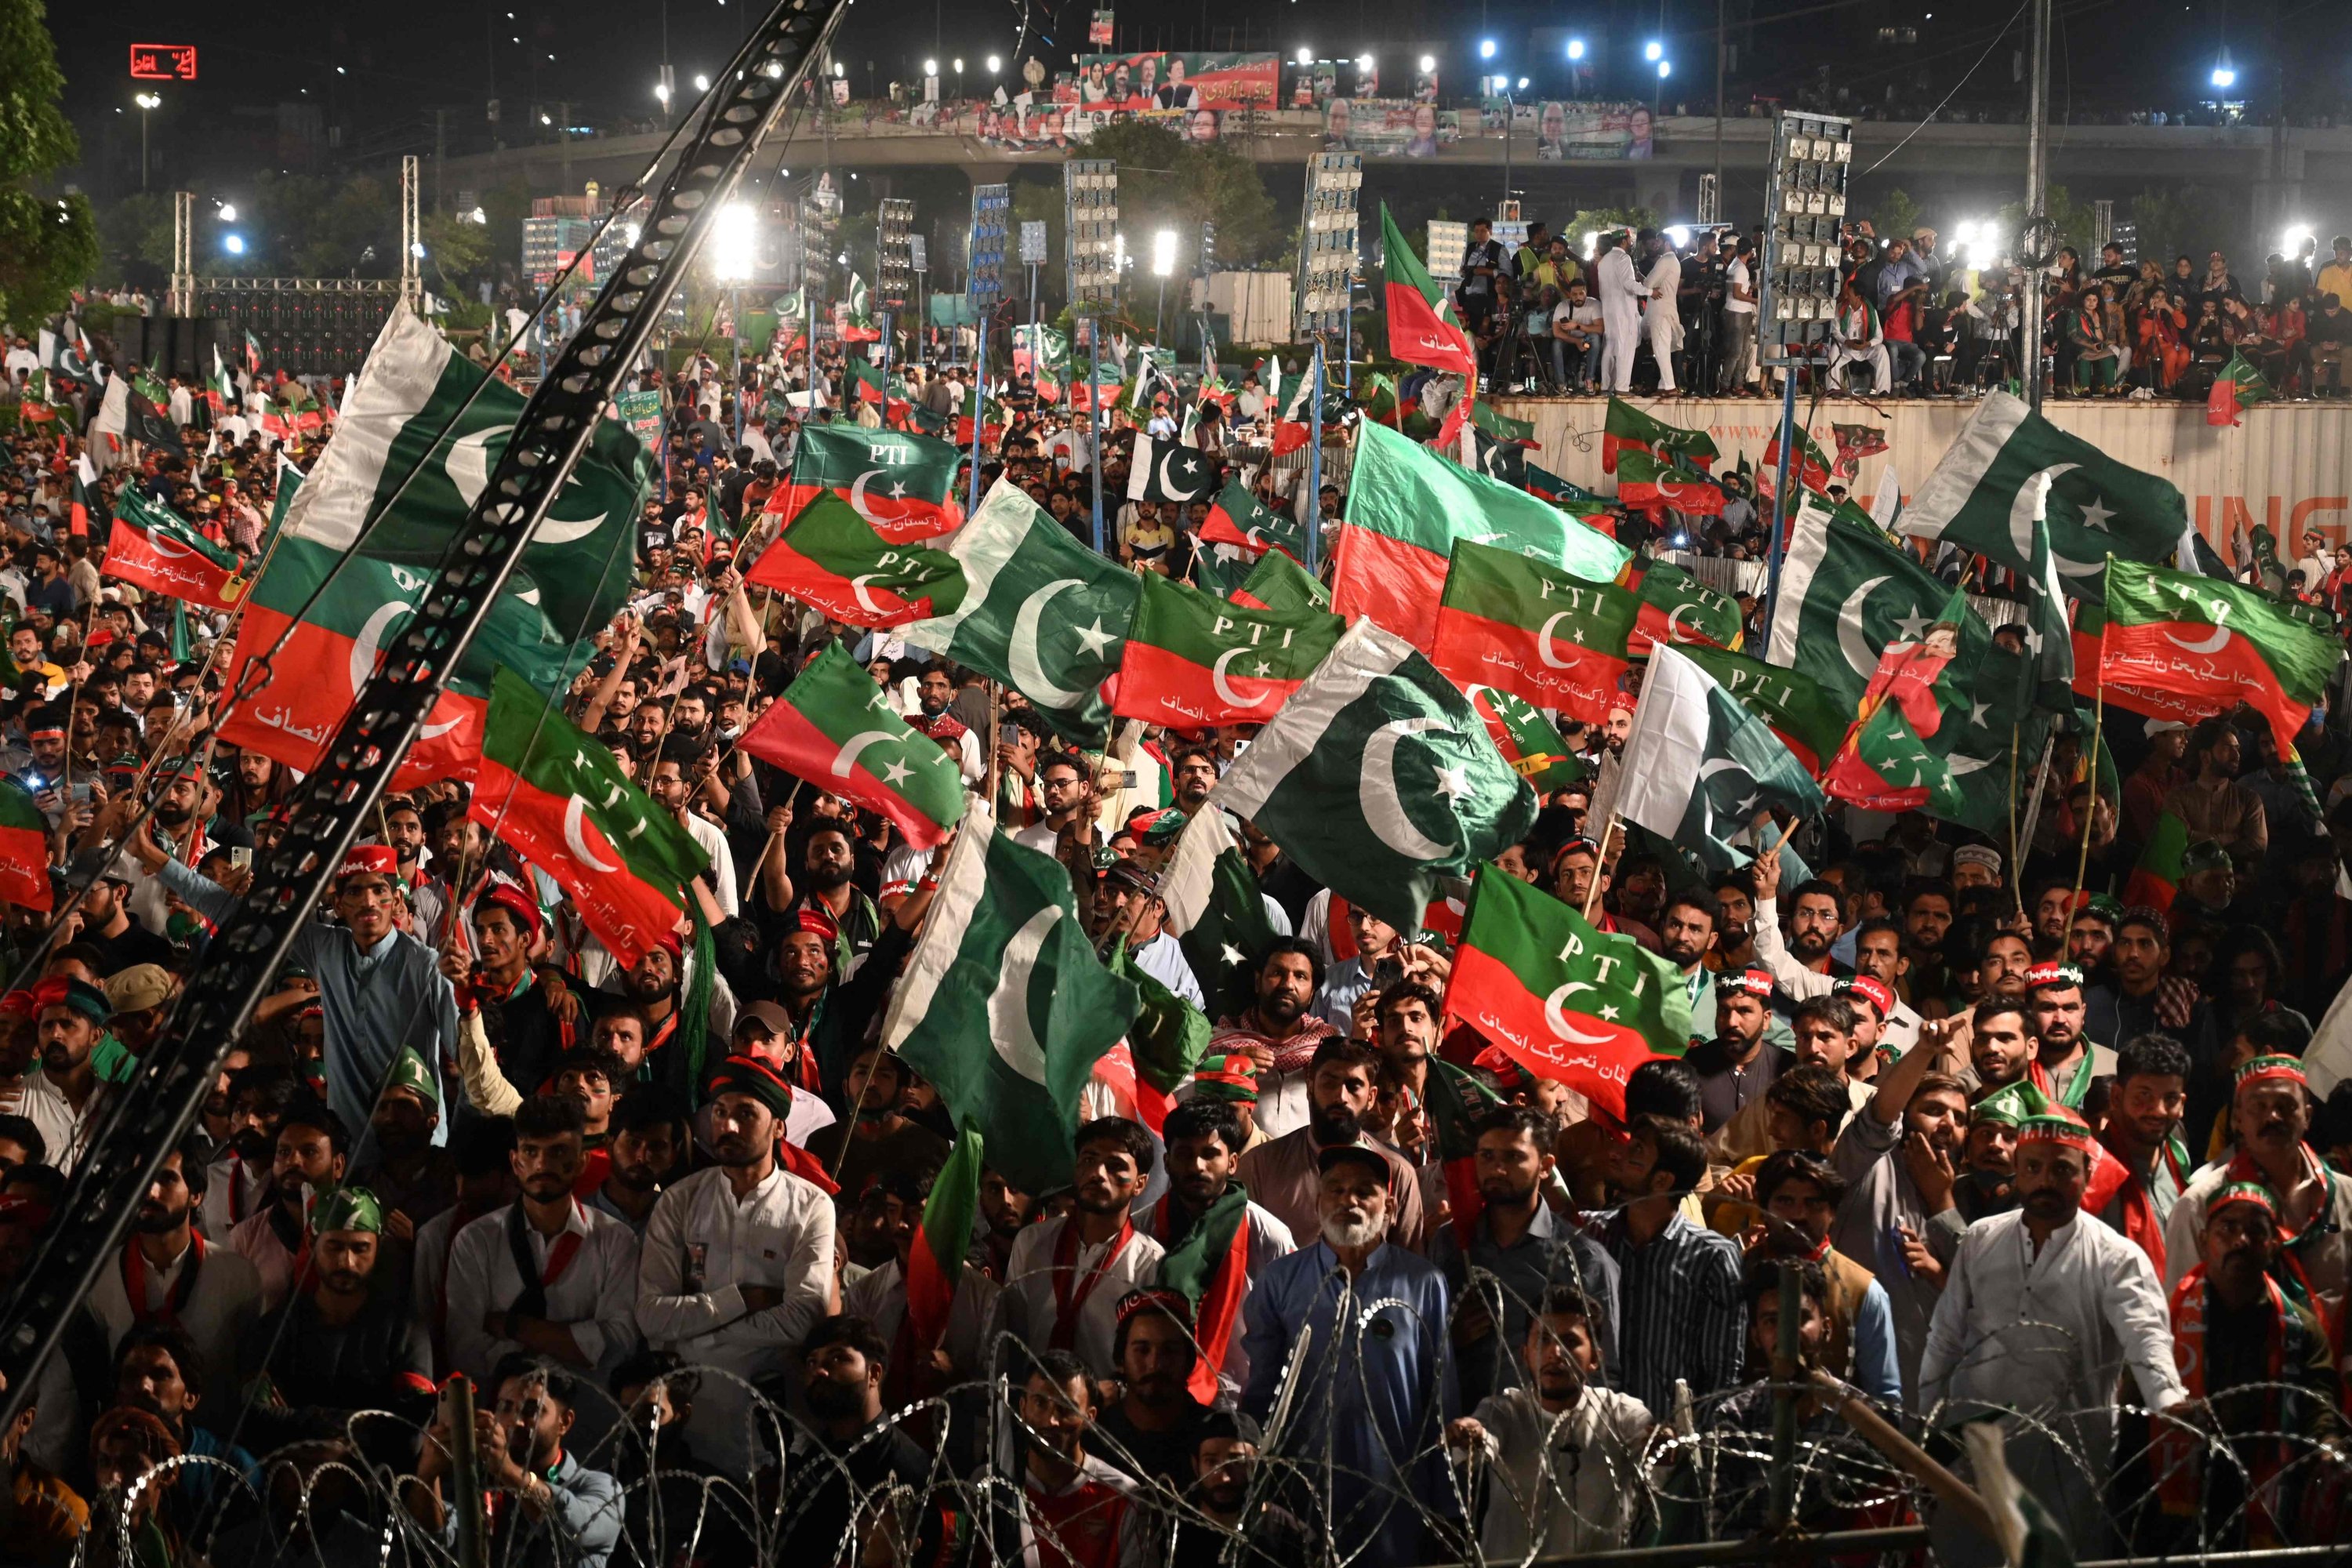 Supporters of Pakistan Tehreek-e-Insaf (PTI) party of former Prime Minister Imran Khan, hold the party and Pakistani flags as they listen to the speech during a rally in Lahore, April 21, 2022. (AFP Photo)